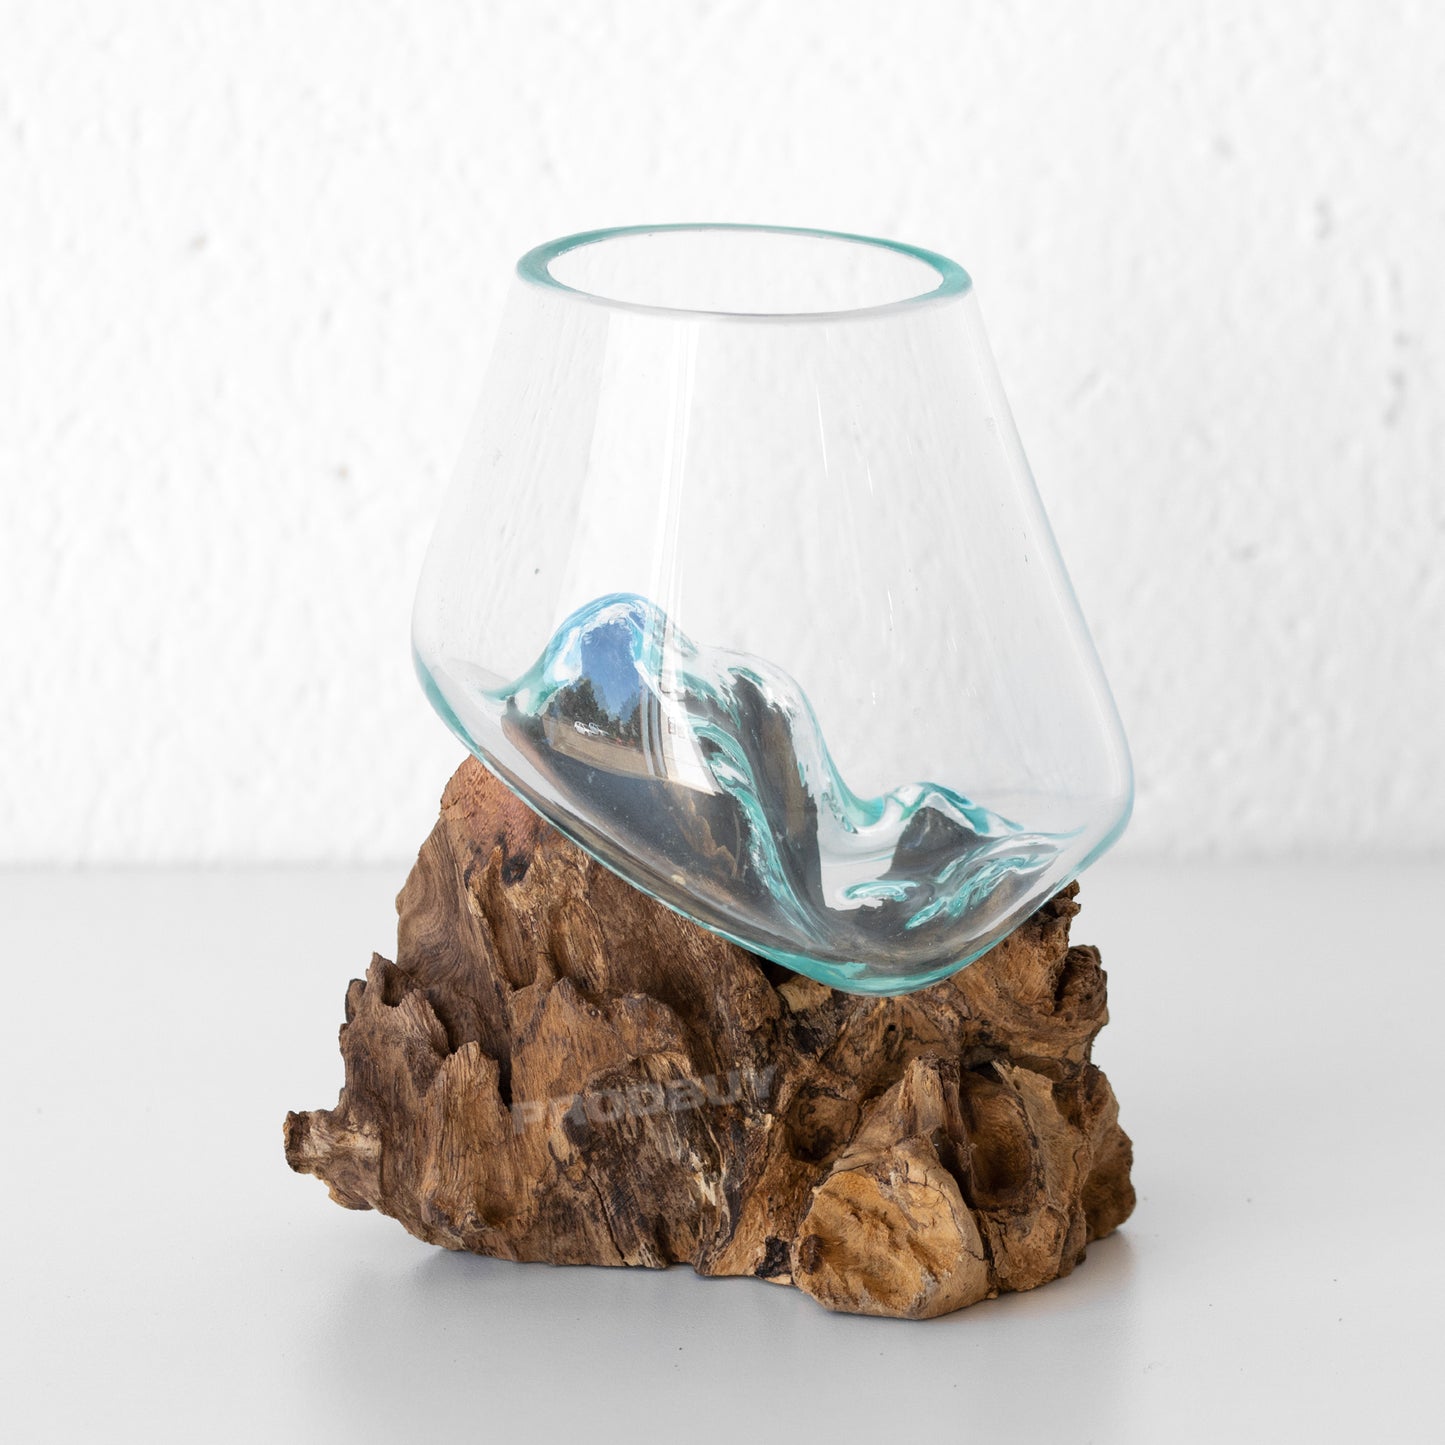 Molten 10cm Glass Bowl on Natural Rustic Teak Root Wood Stand